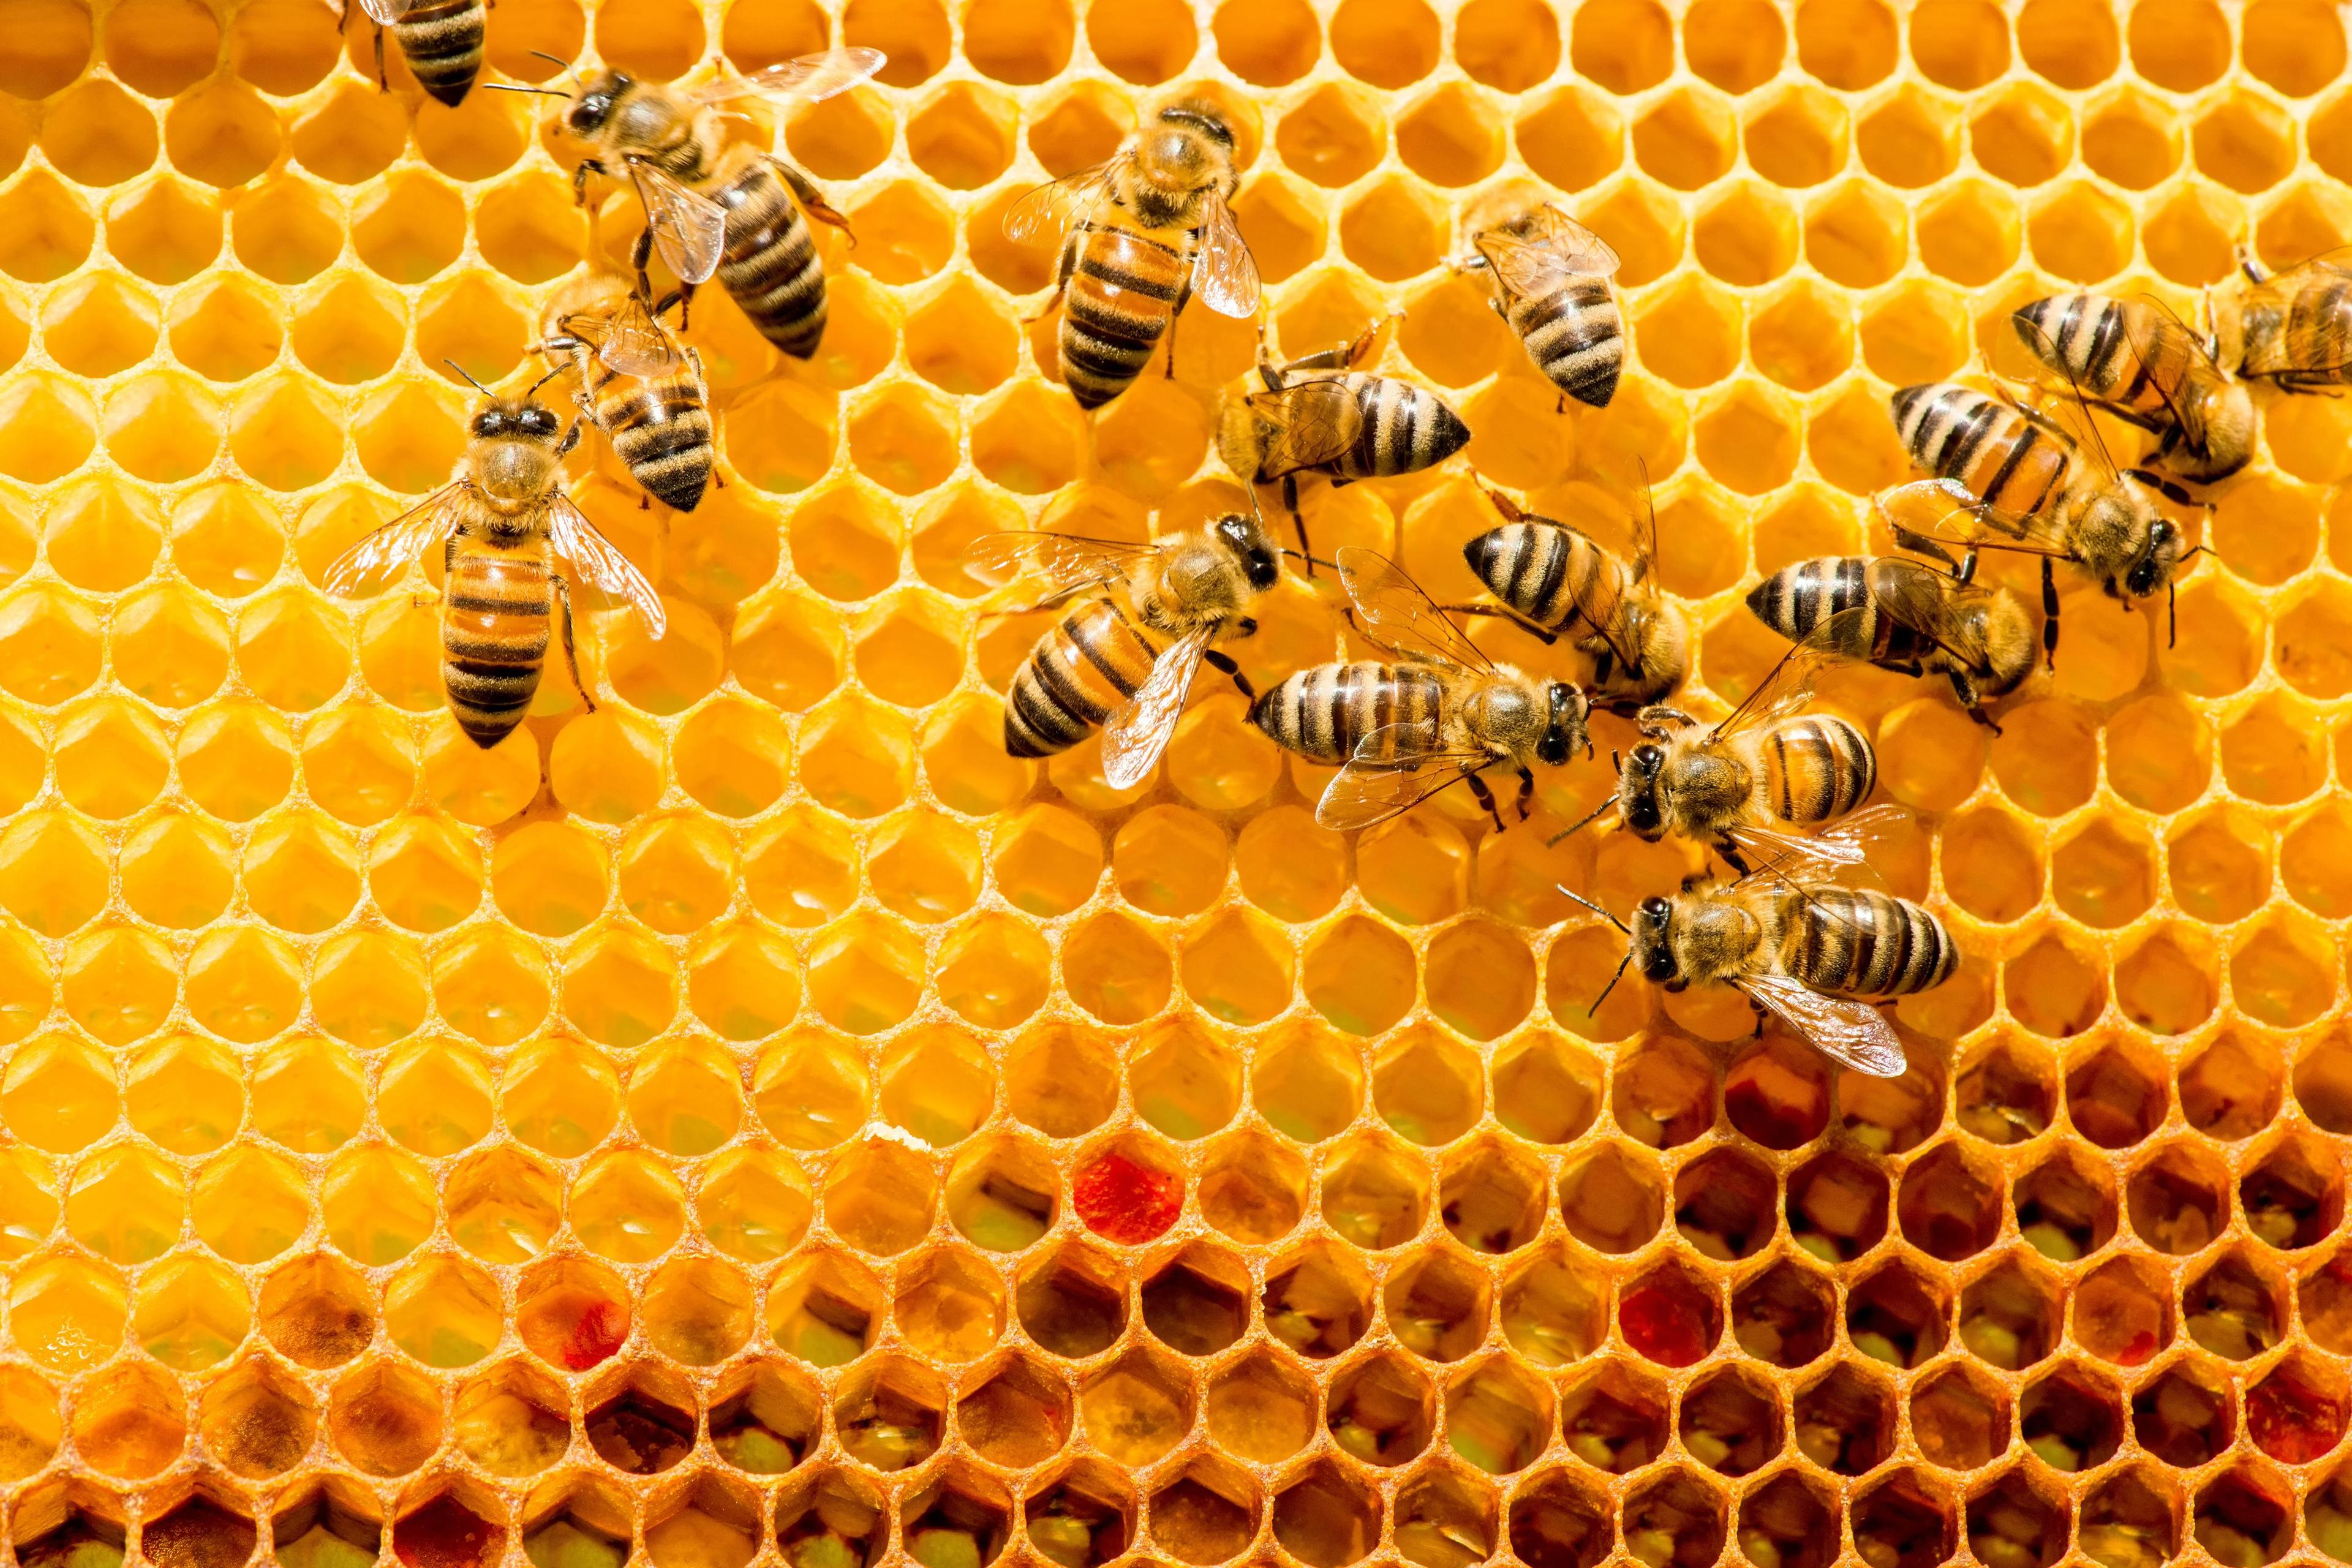 Bees in their honeycombs